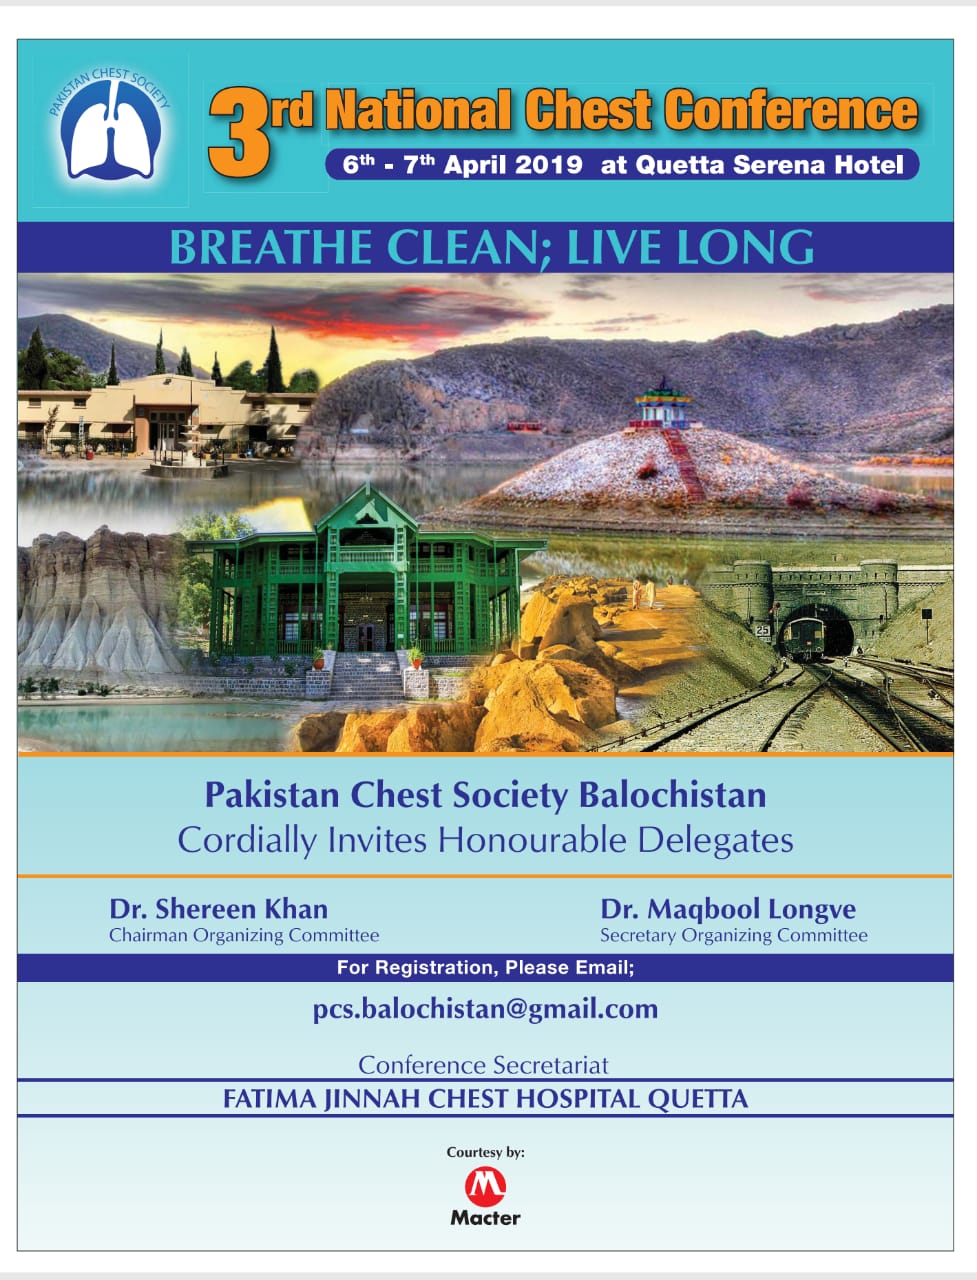 3rd National Chest Conference 6th – 7th April 2019 at Quetta Serena Hotel